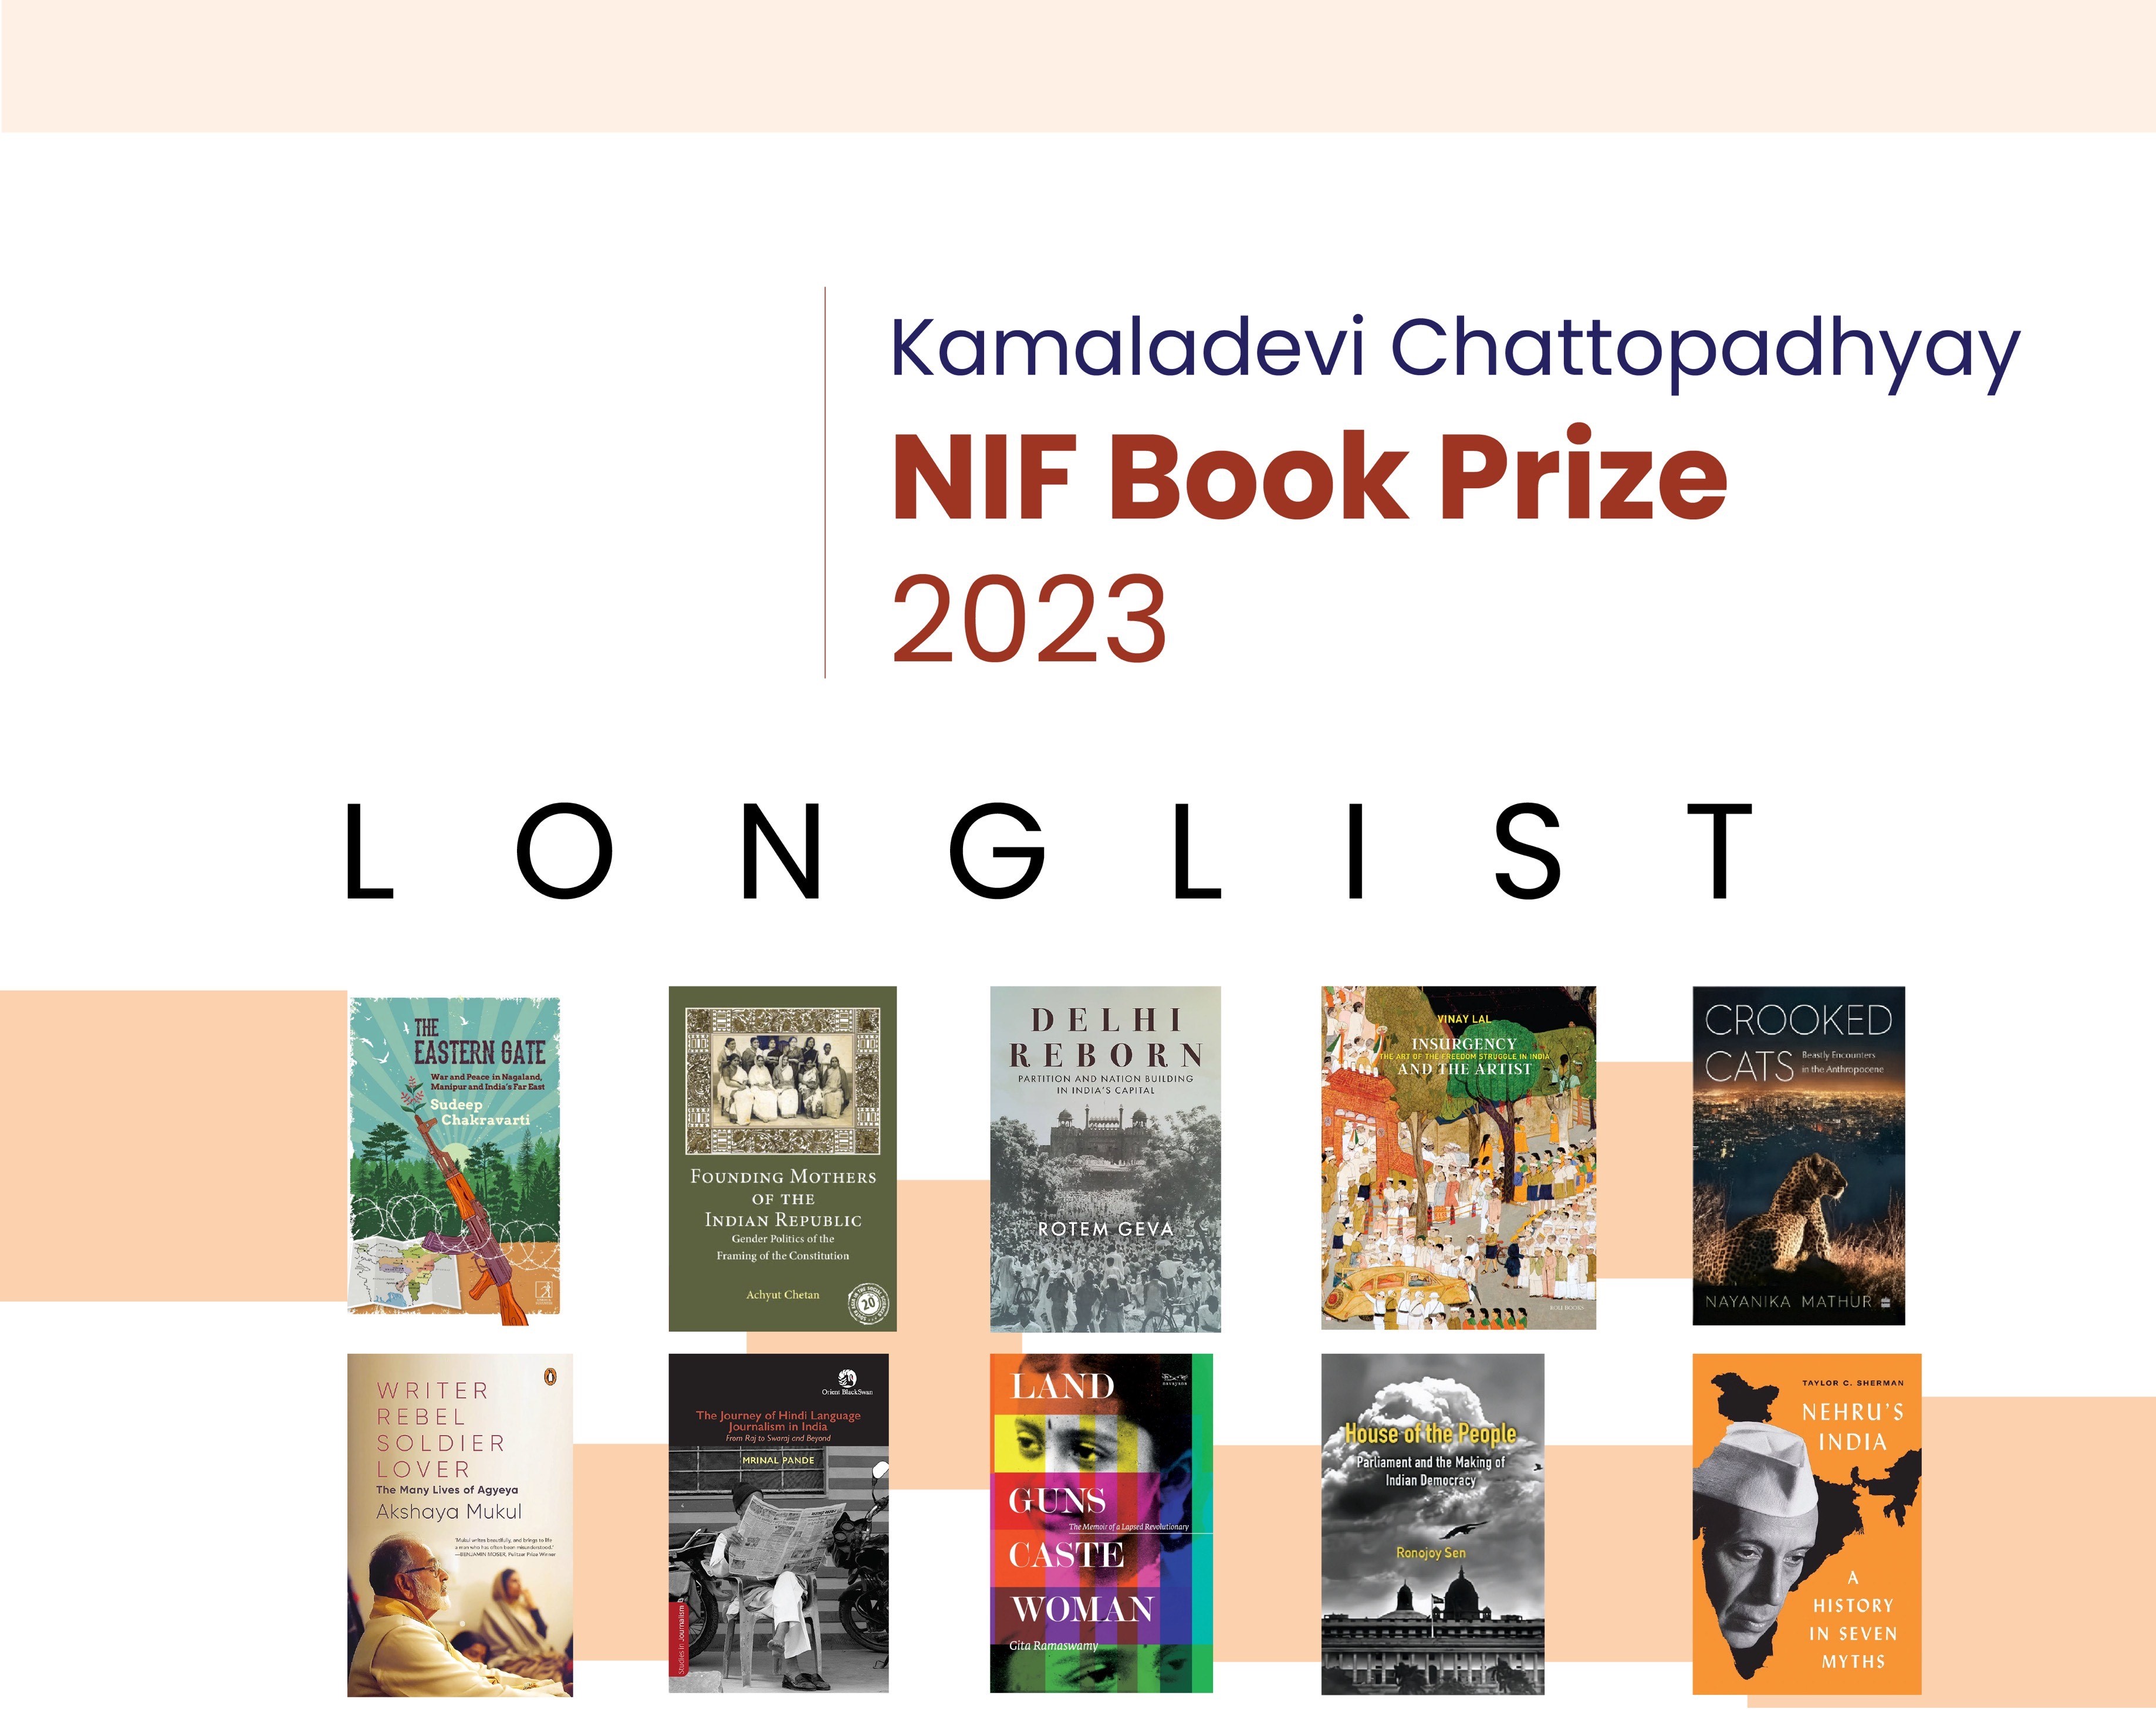 The New India Foundation is pleased to announce the LONGLIST  for the Kamaladevi Chattopadhyay NIF Book Prize 2023